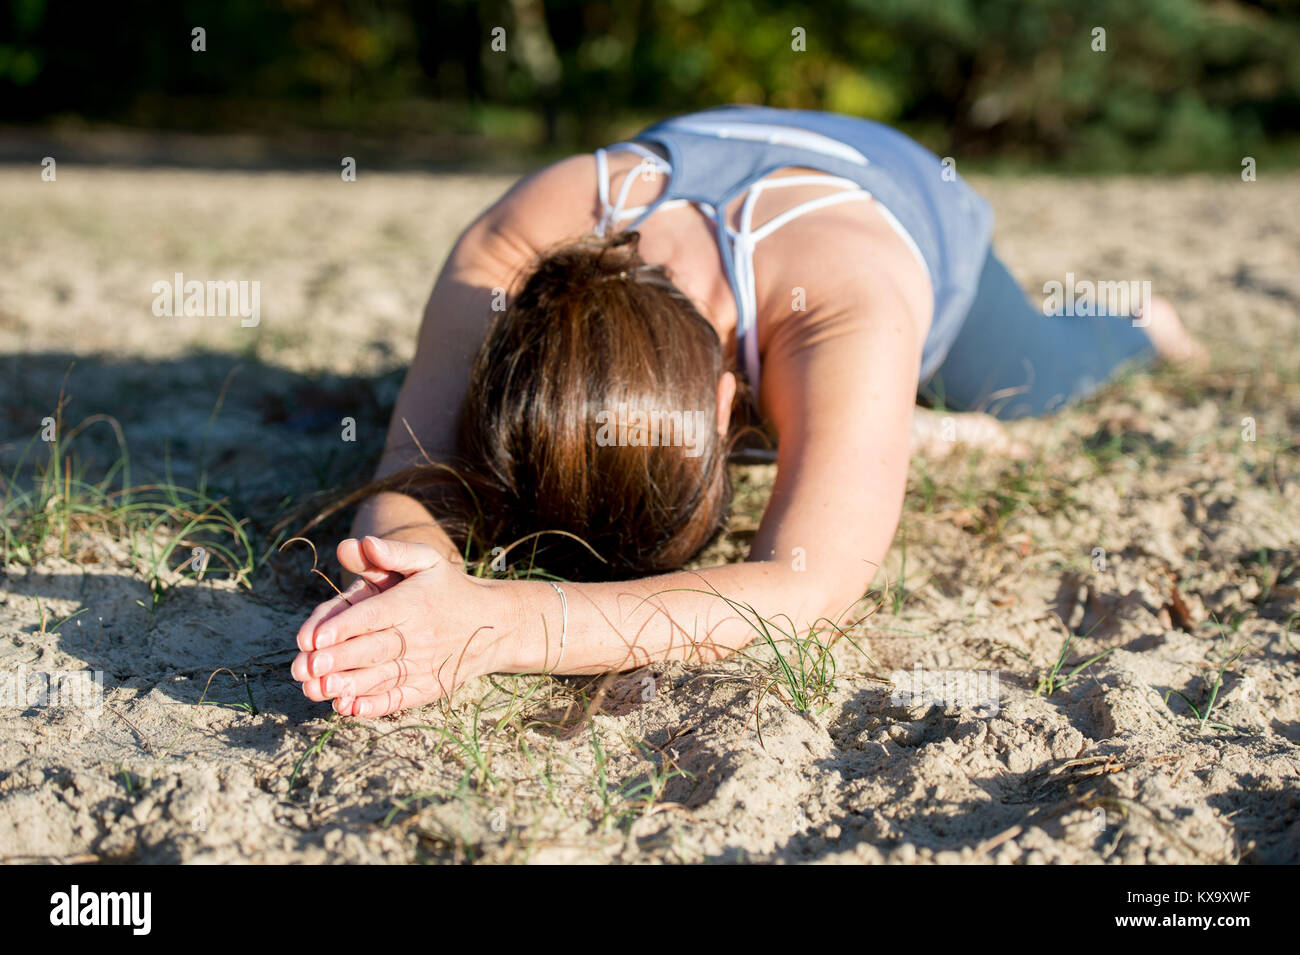 yoga, dunes, sand, woman, sport, exercise, fitness, training, outdoor, lifestyle, health, healthy, nature, workout, outside, female, park, summer, aut Stock Photo